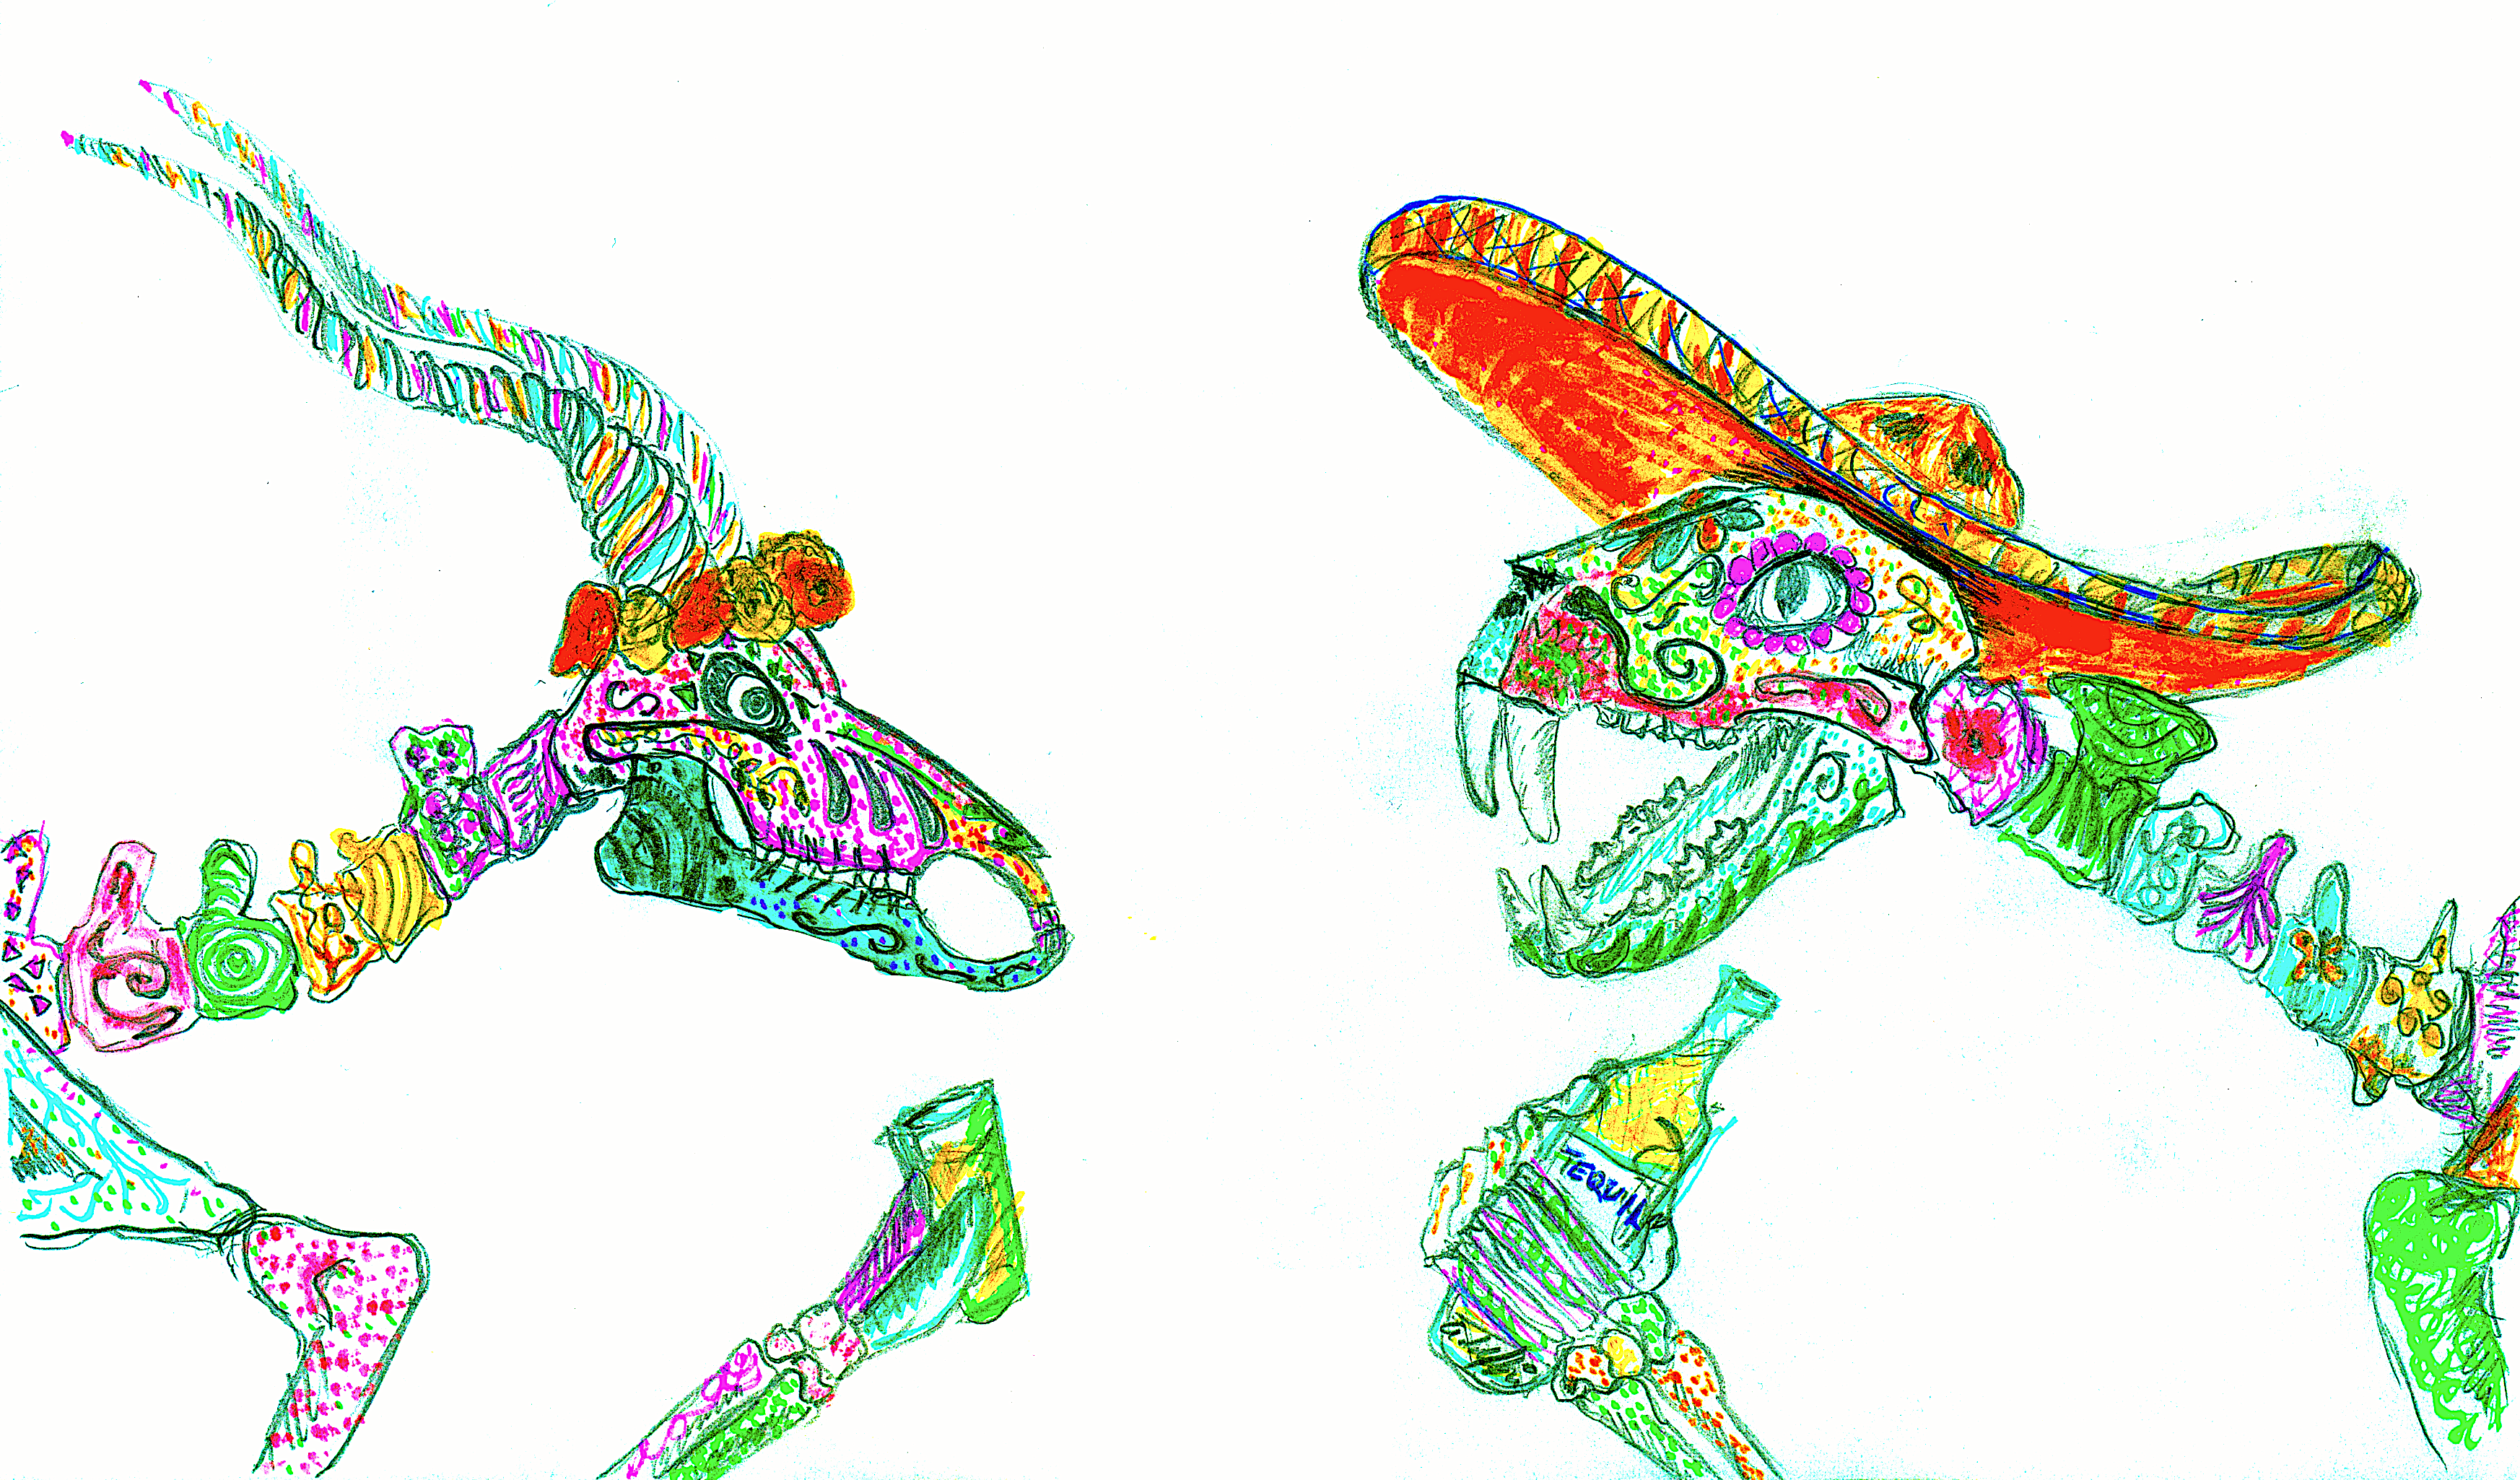 A drawing by professor Adolfo Rivero Müller where two skeleton animals are drawn in dia de los muertos style and drink tequila